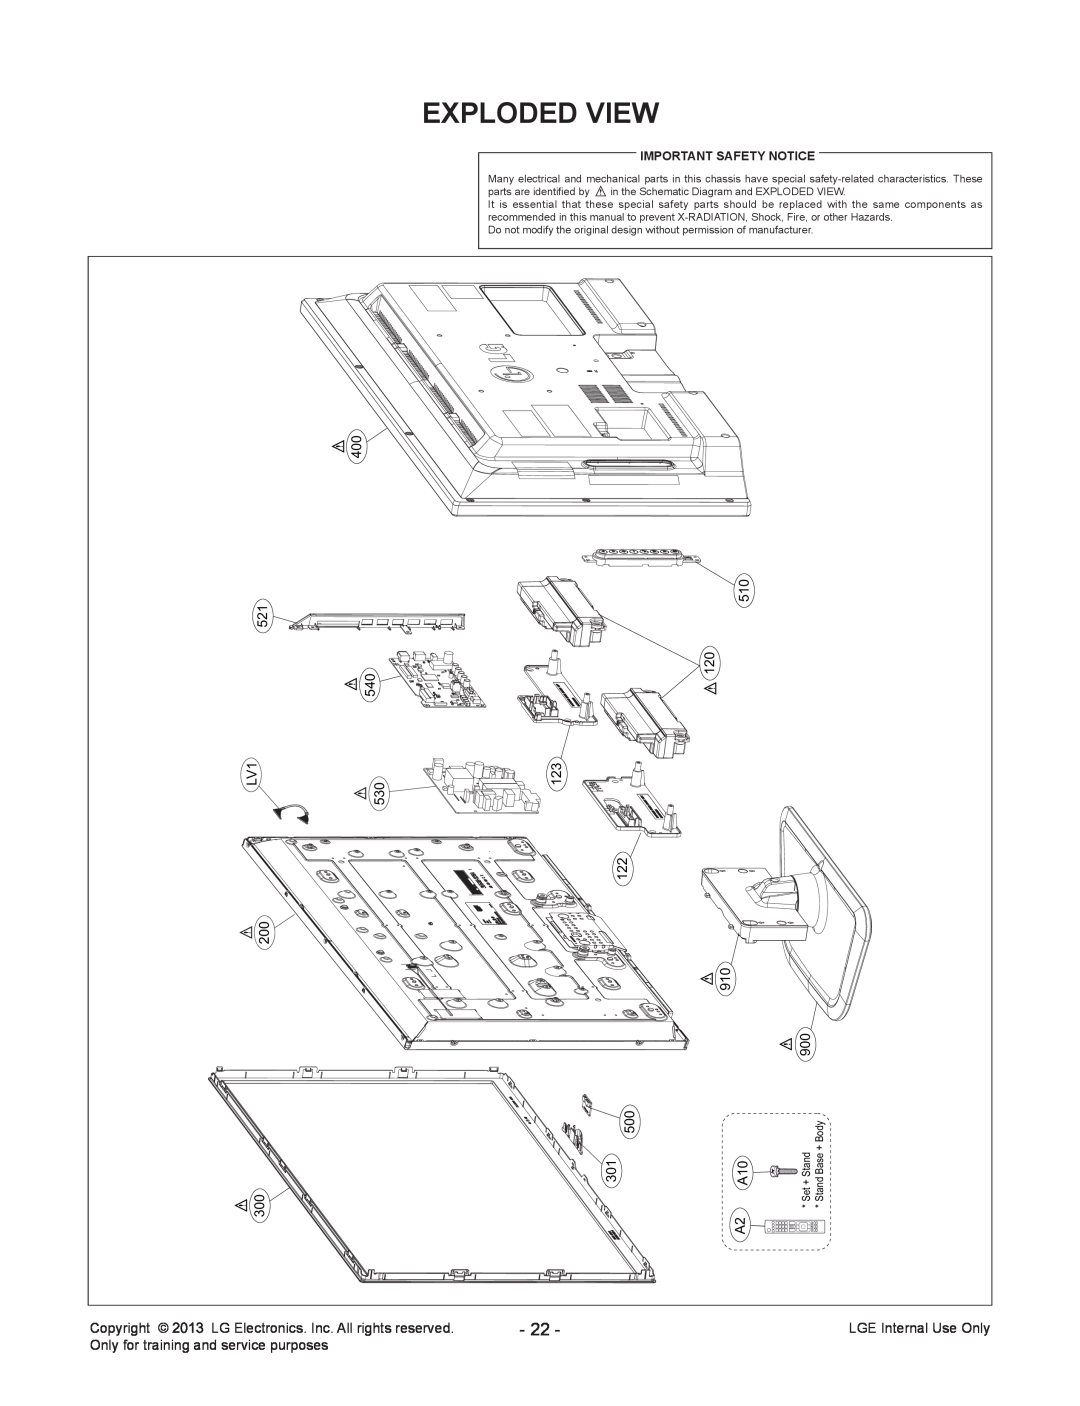 LG Electronics 39LN548C/549C Exploded View, Copyright, LG Electronics. Inc. All rights reserved, LGE Internal Use Only 